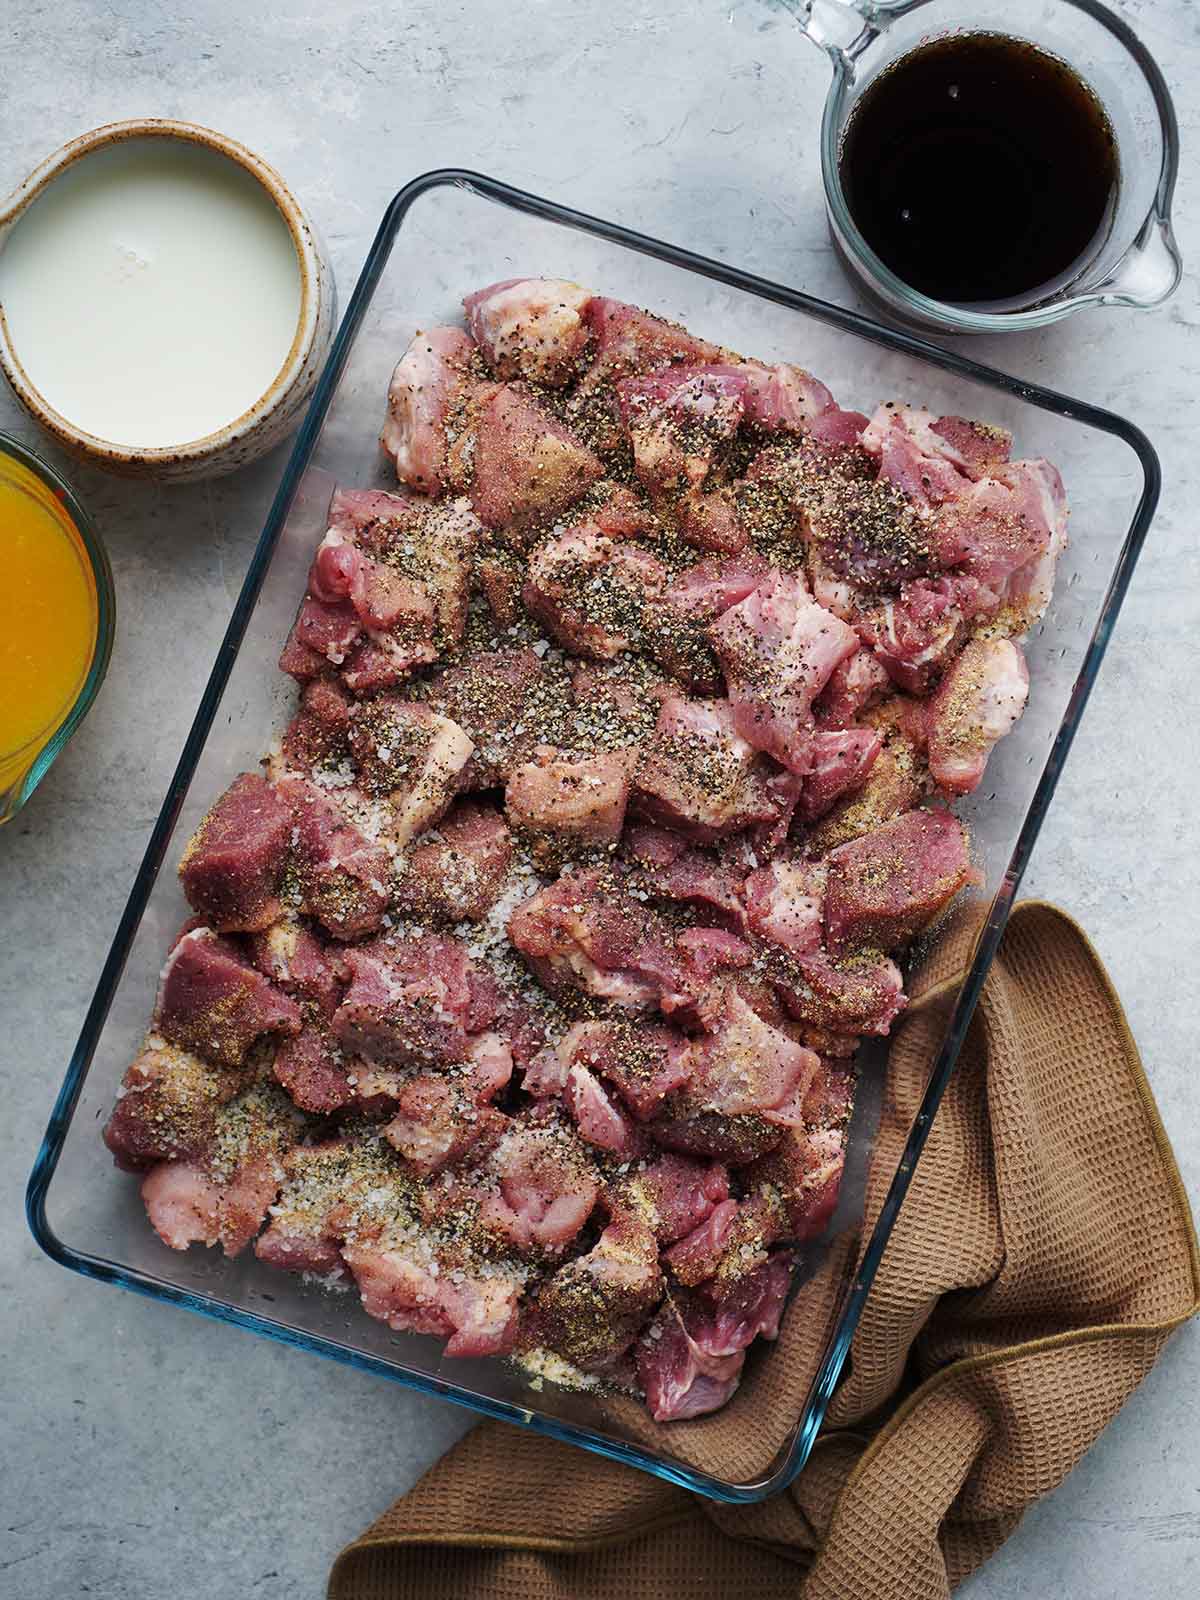 Raw pork chunks placed in a baking dish with seasoning.